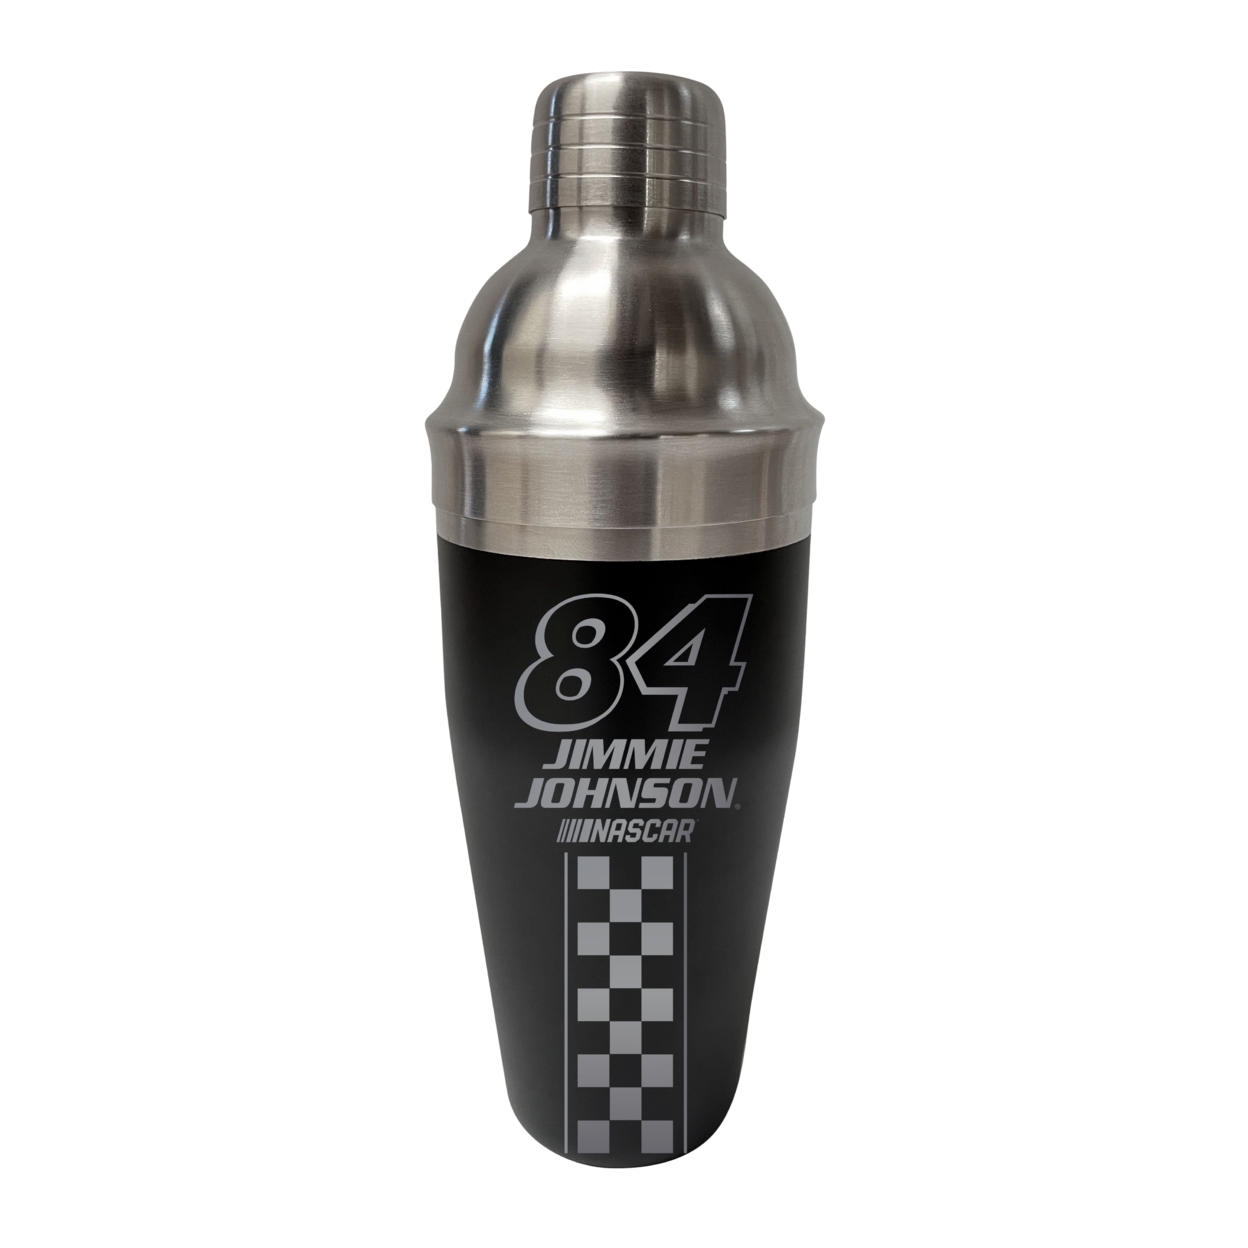 #84 Jimmie Johnson NASCAR Officially Licensed Cocktail Shaker